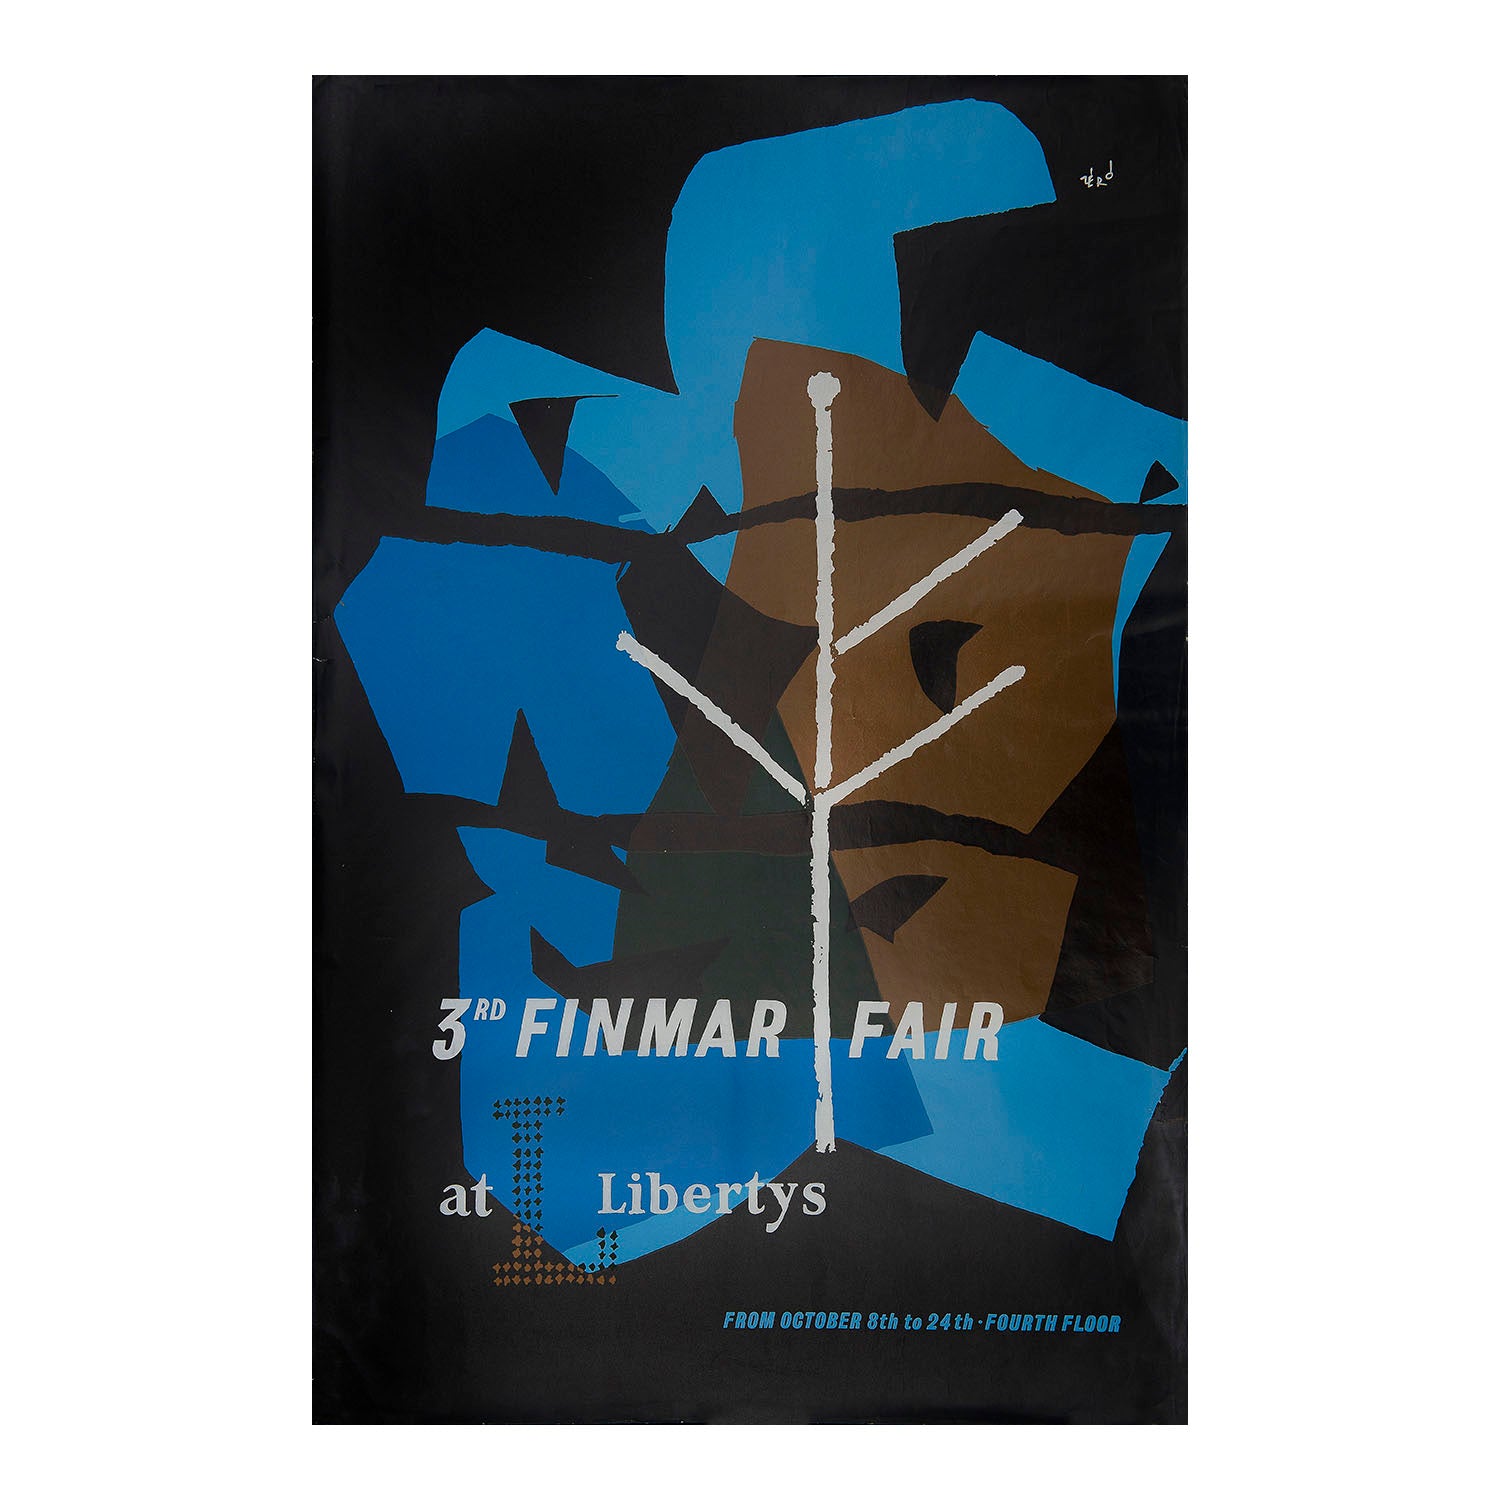 Original poster '3rd Finmar Fair at Liberty's' by Hans Schleger (who signed his work ‘Zero’), advertising an exhibition of Finmar homewares at Liberty’s department store, 1957. The poster features an abstract design of a leaf. 